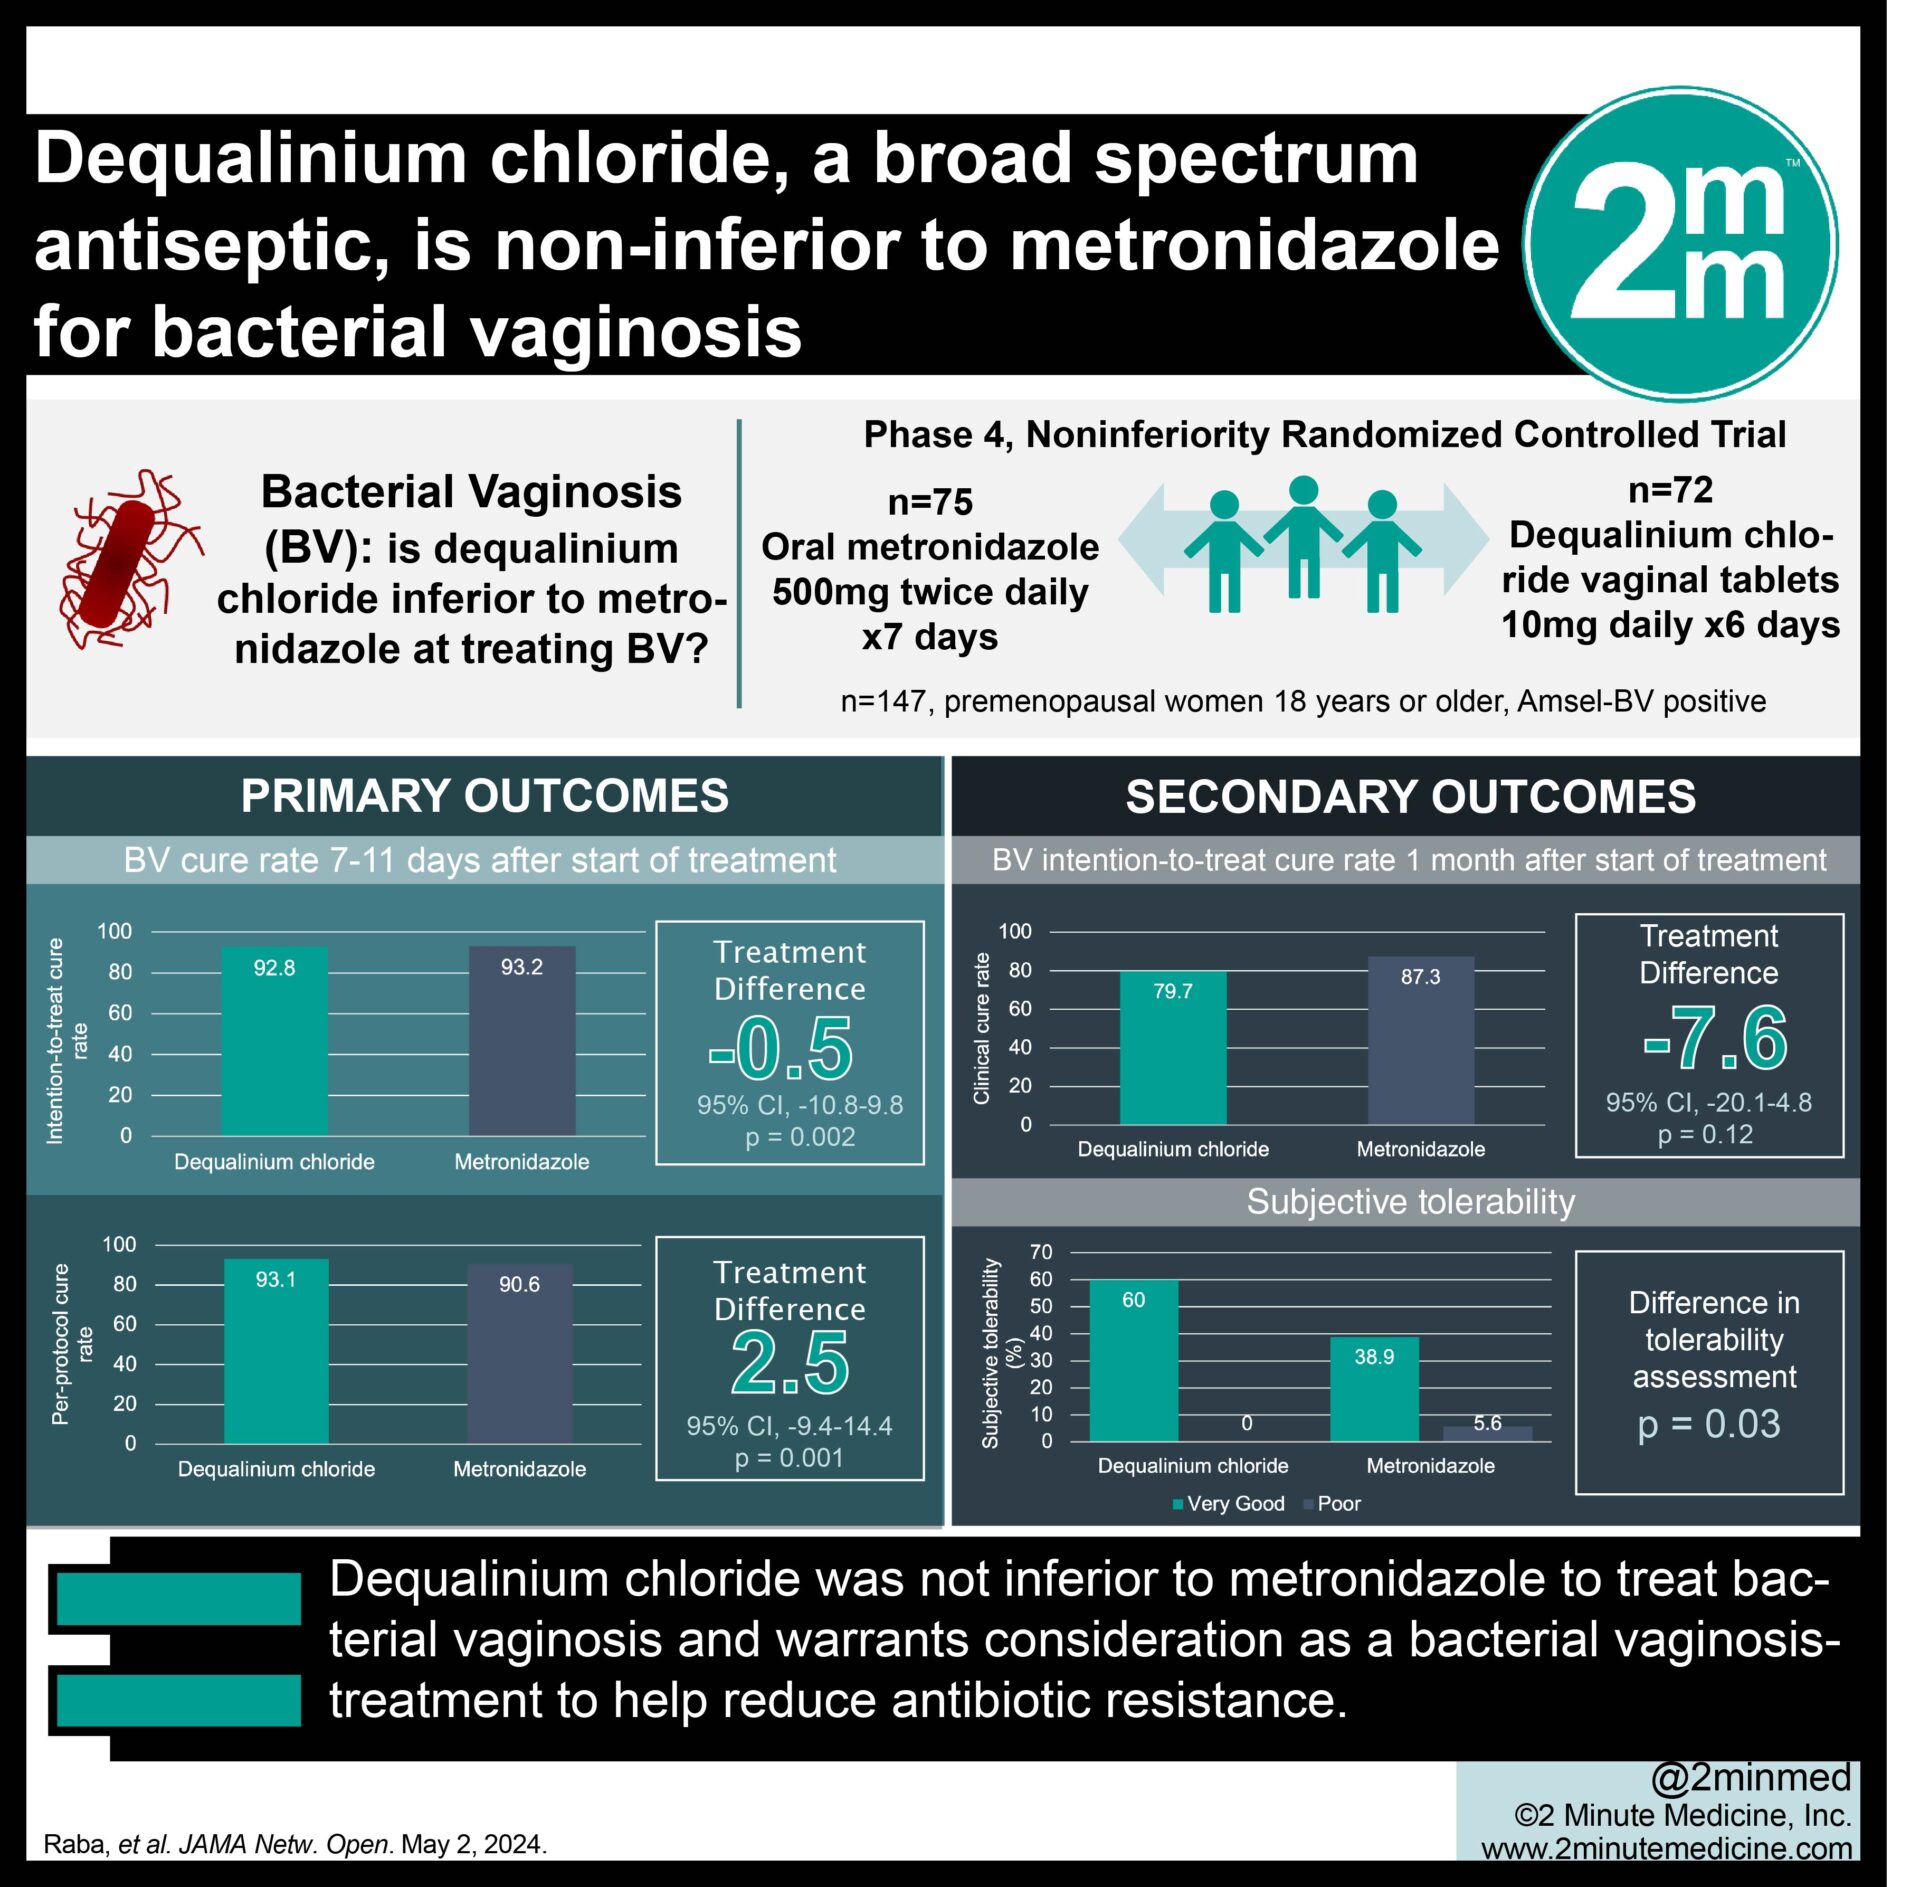 #VisualAbstract: Dequalinium chloride, a broad spectrum antiseptic, is non-inferior to metronidazole for bacterial vaginosis